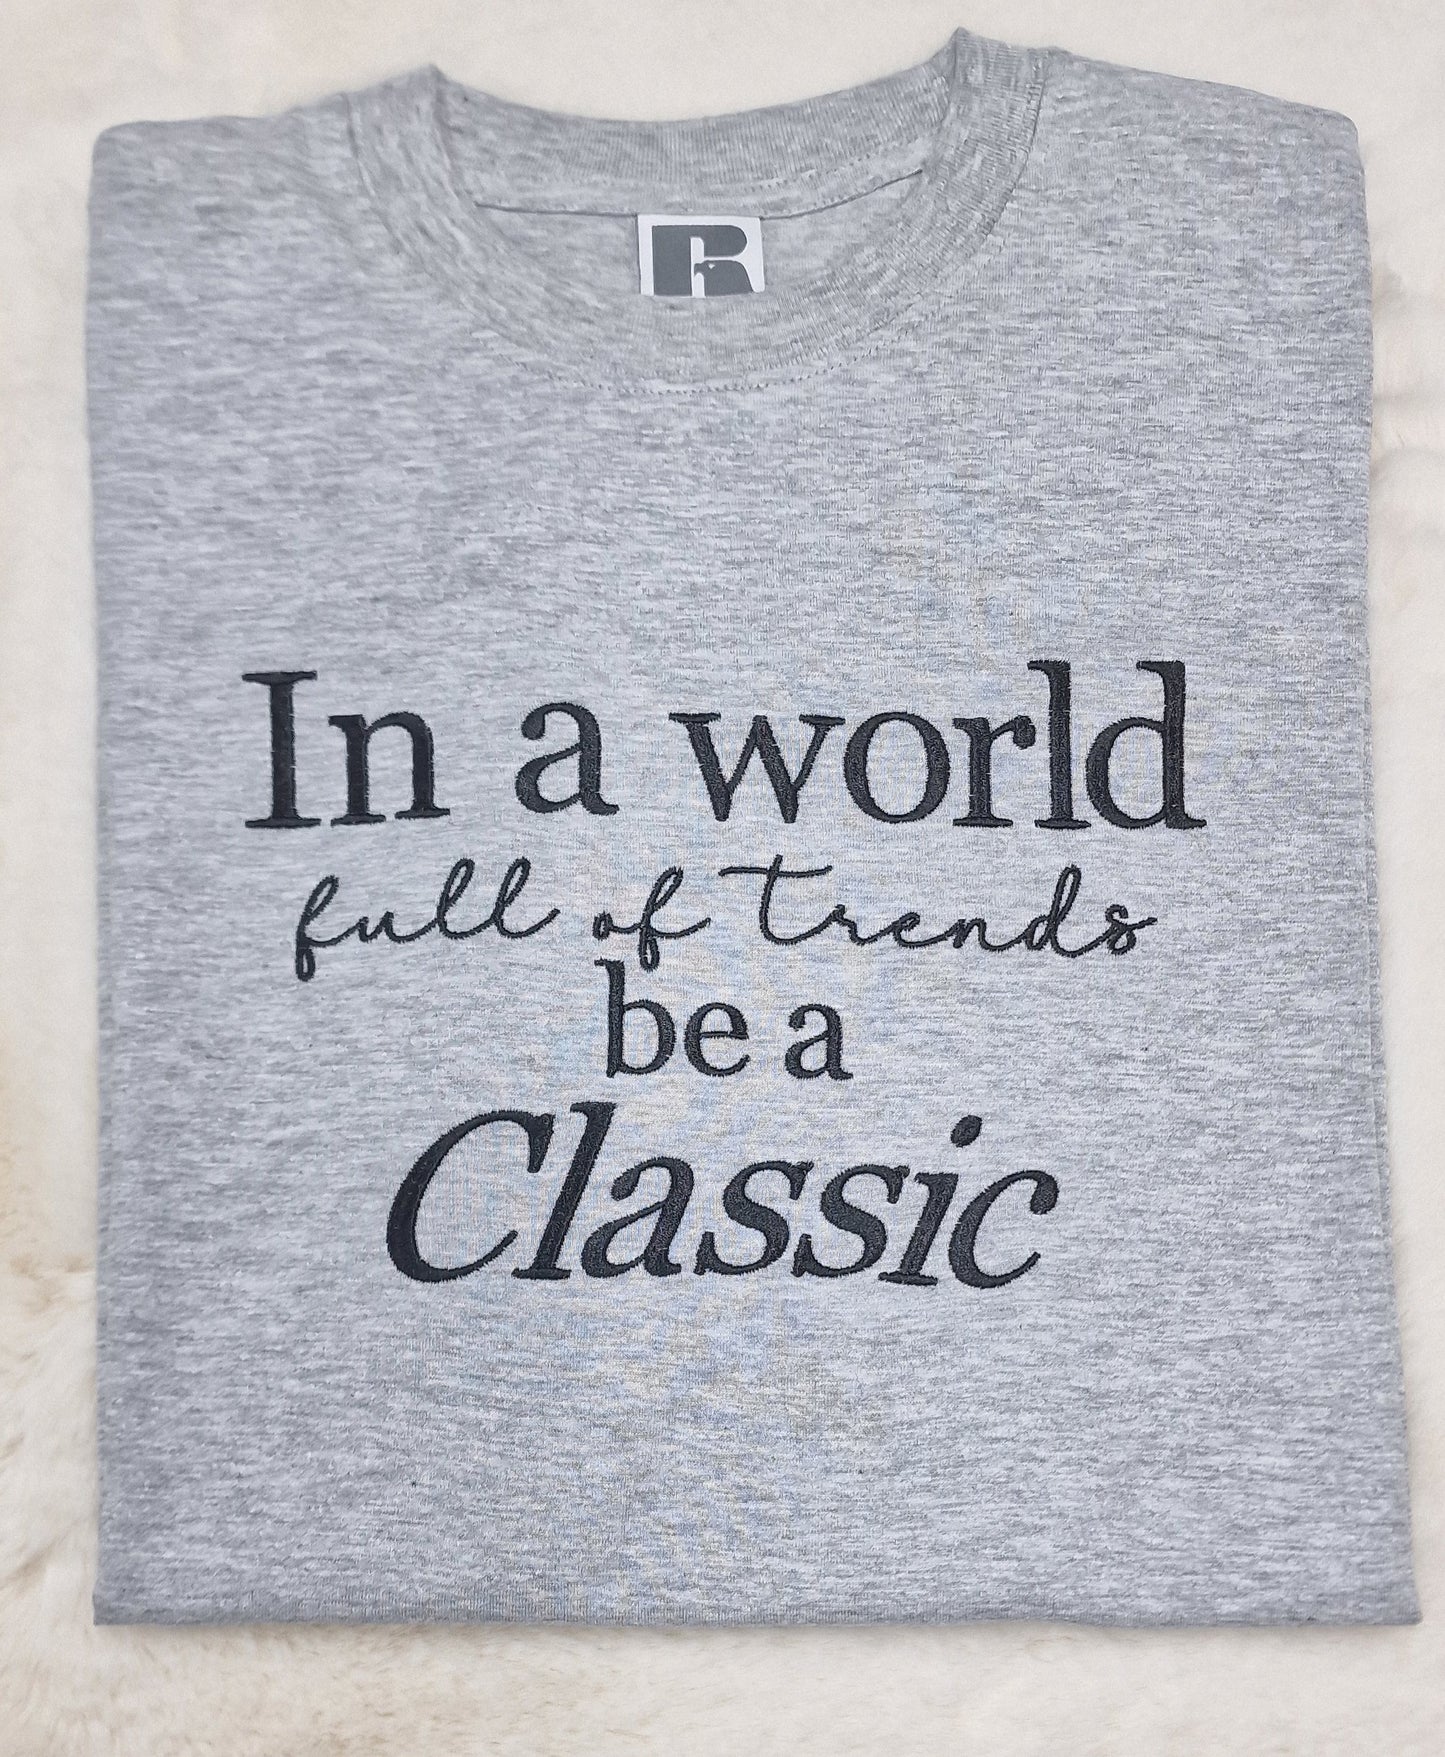 In a world full of trends be a classic T-shirt